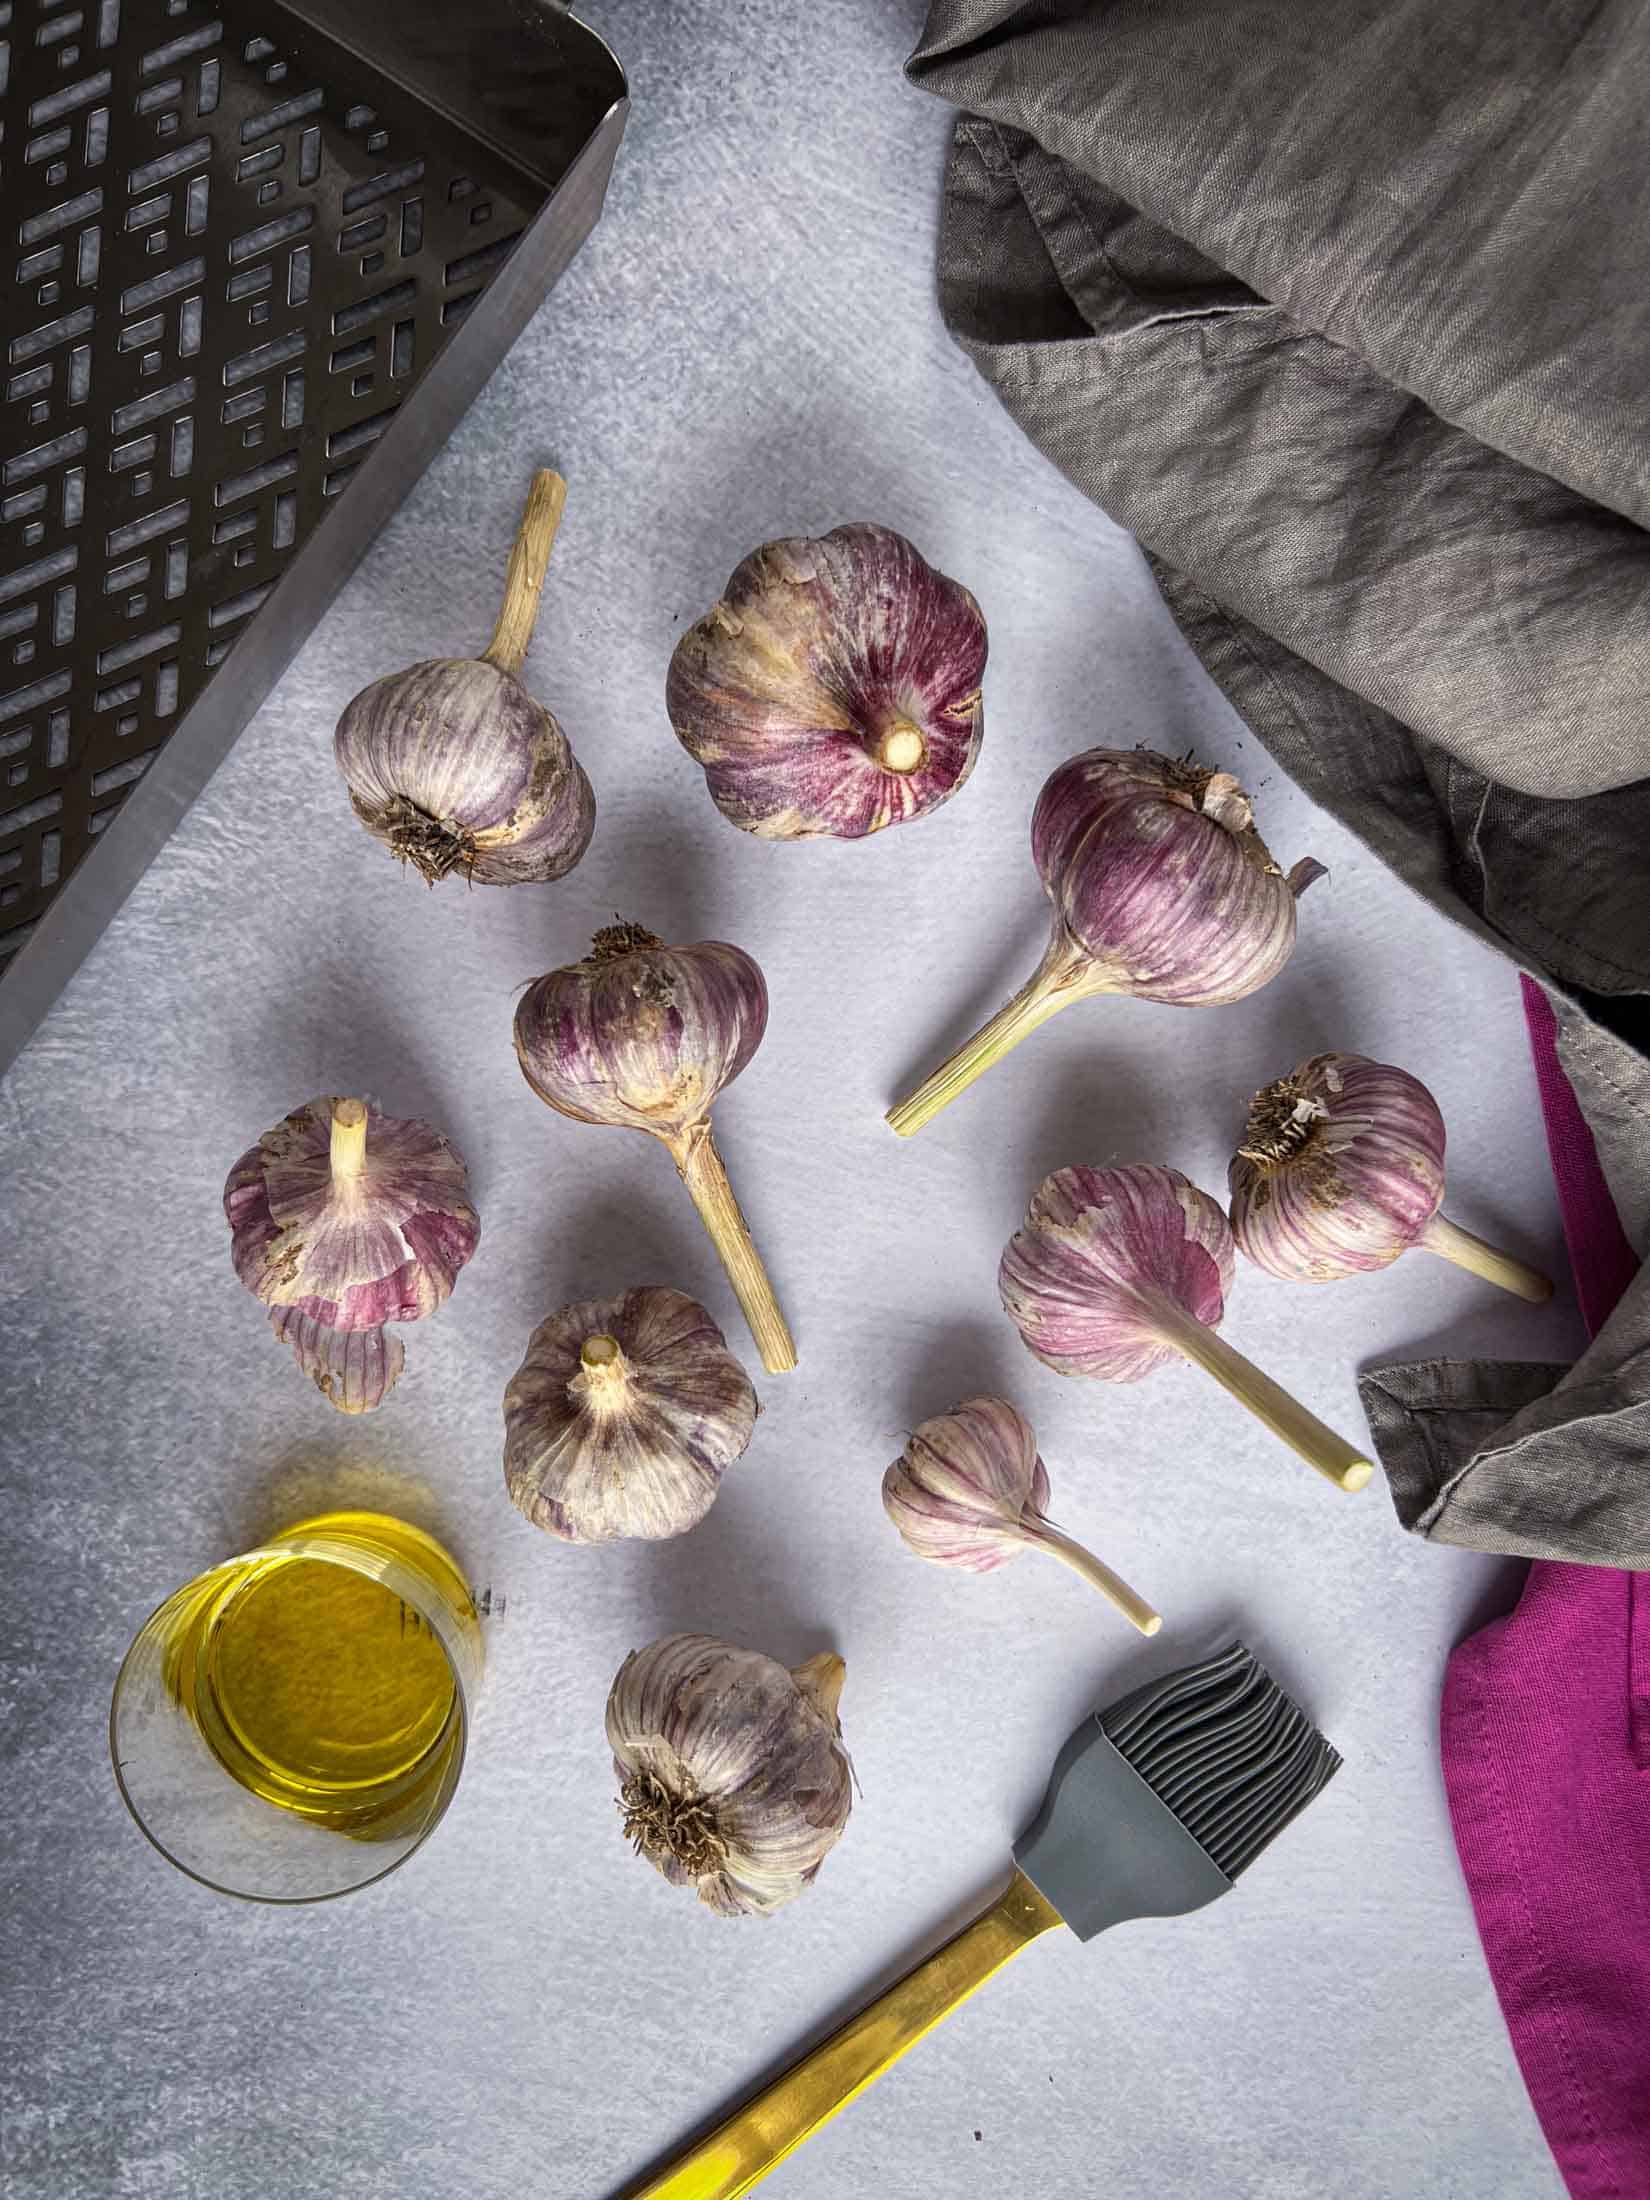 Key ingredients for Traeger garlic recipe 9 heads of garlic, olive oil, and a basting brush.